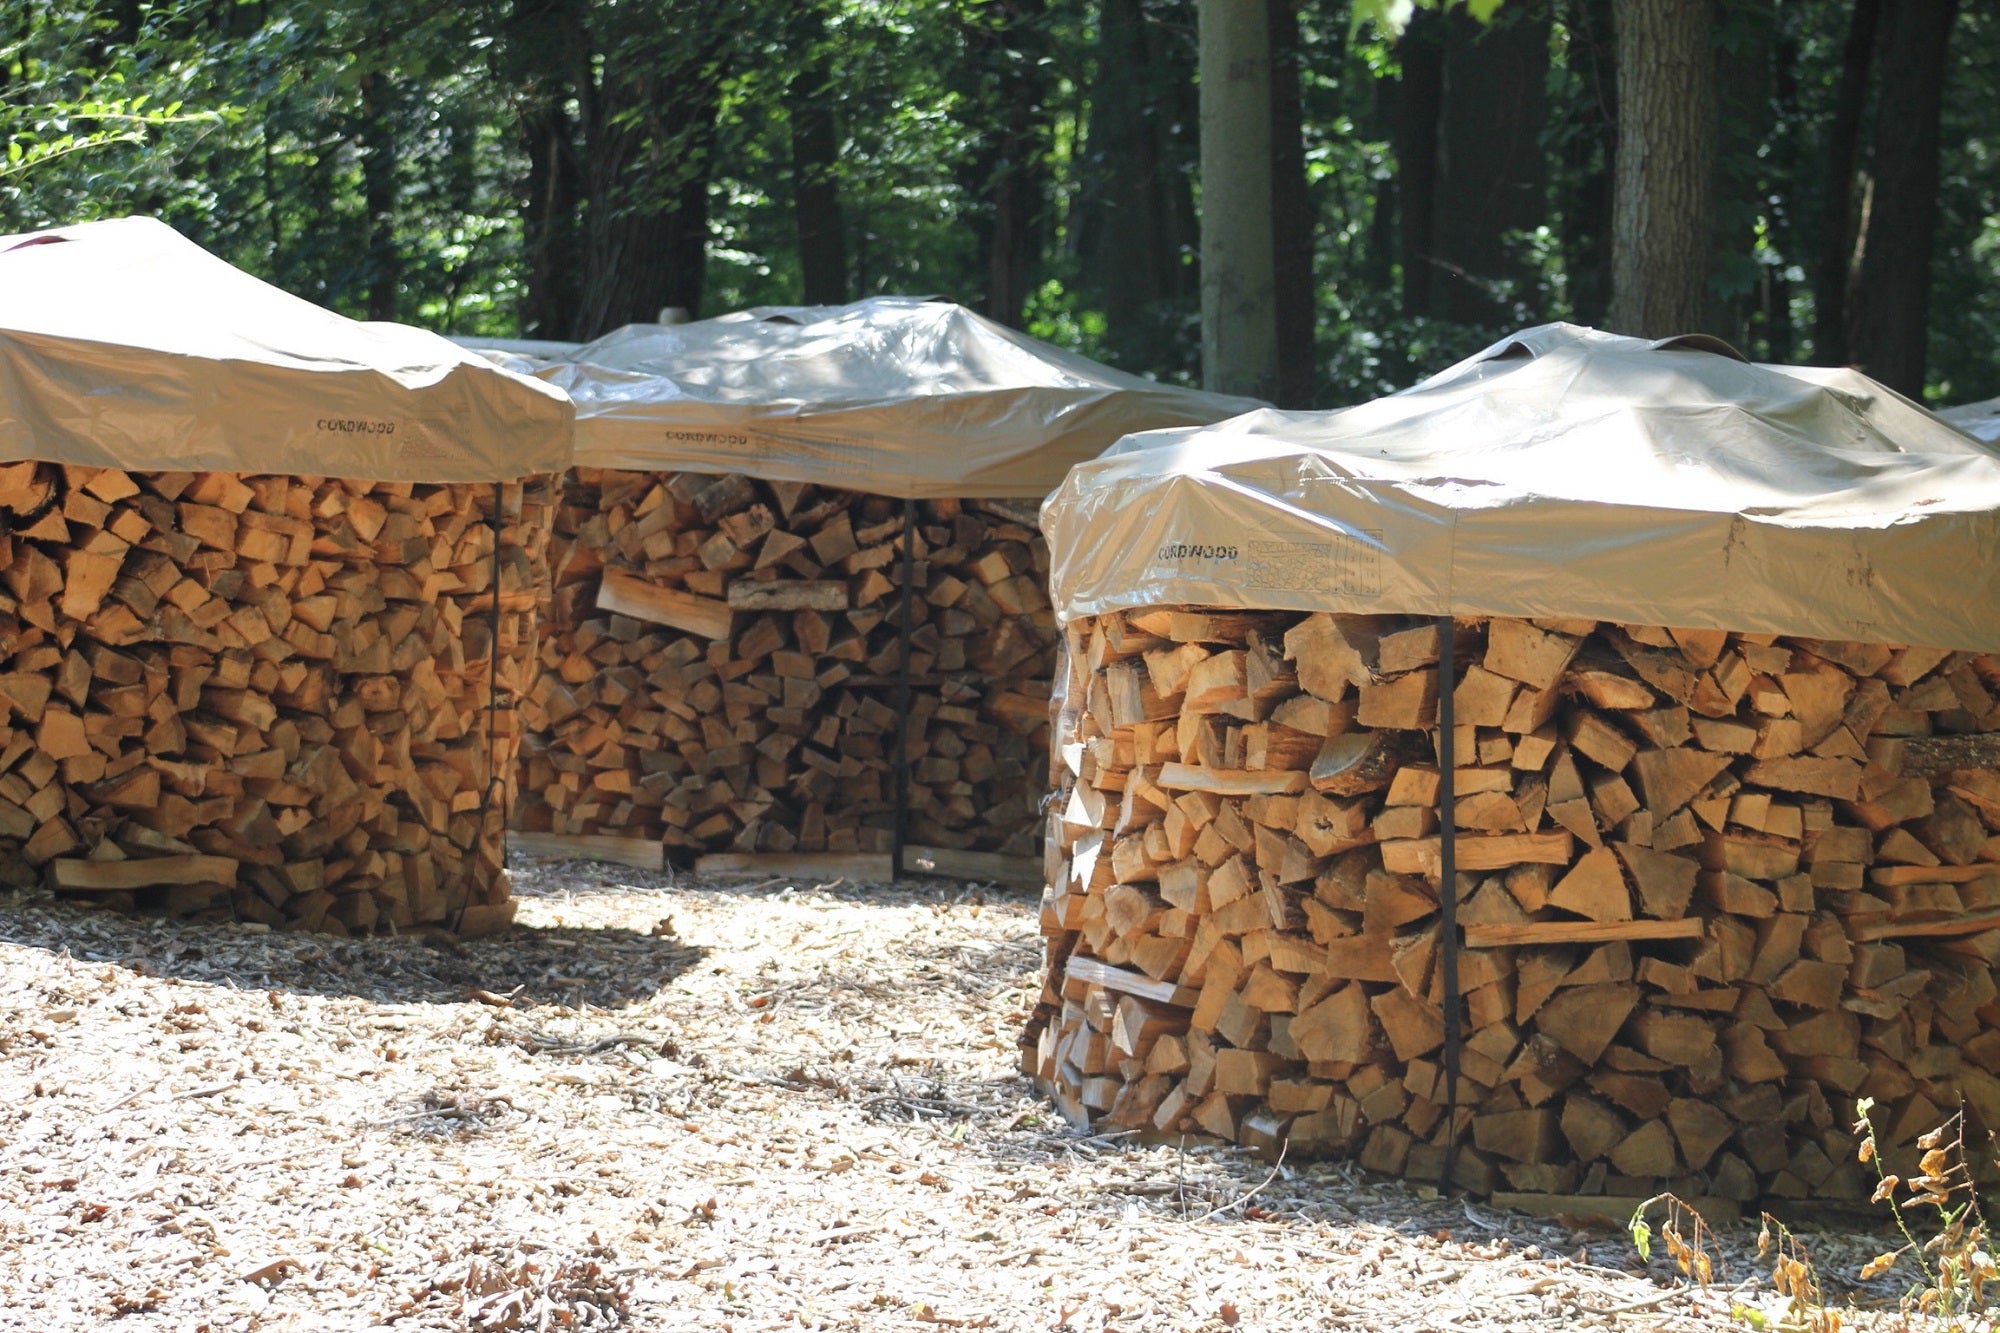 firewood cover ideas, cover firewood with tarp, waterproof firewood covers